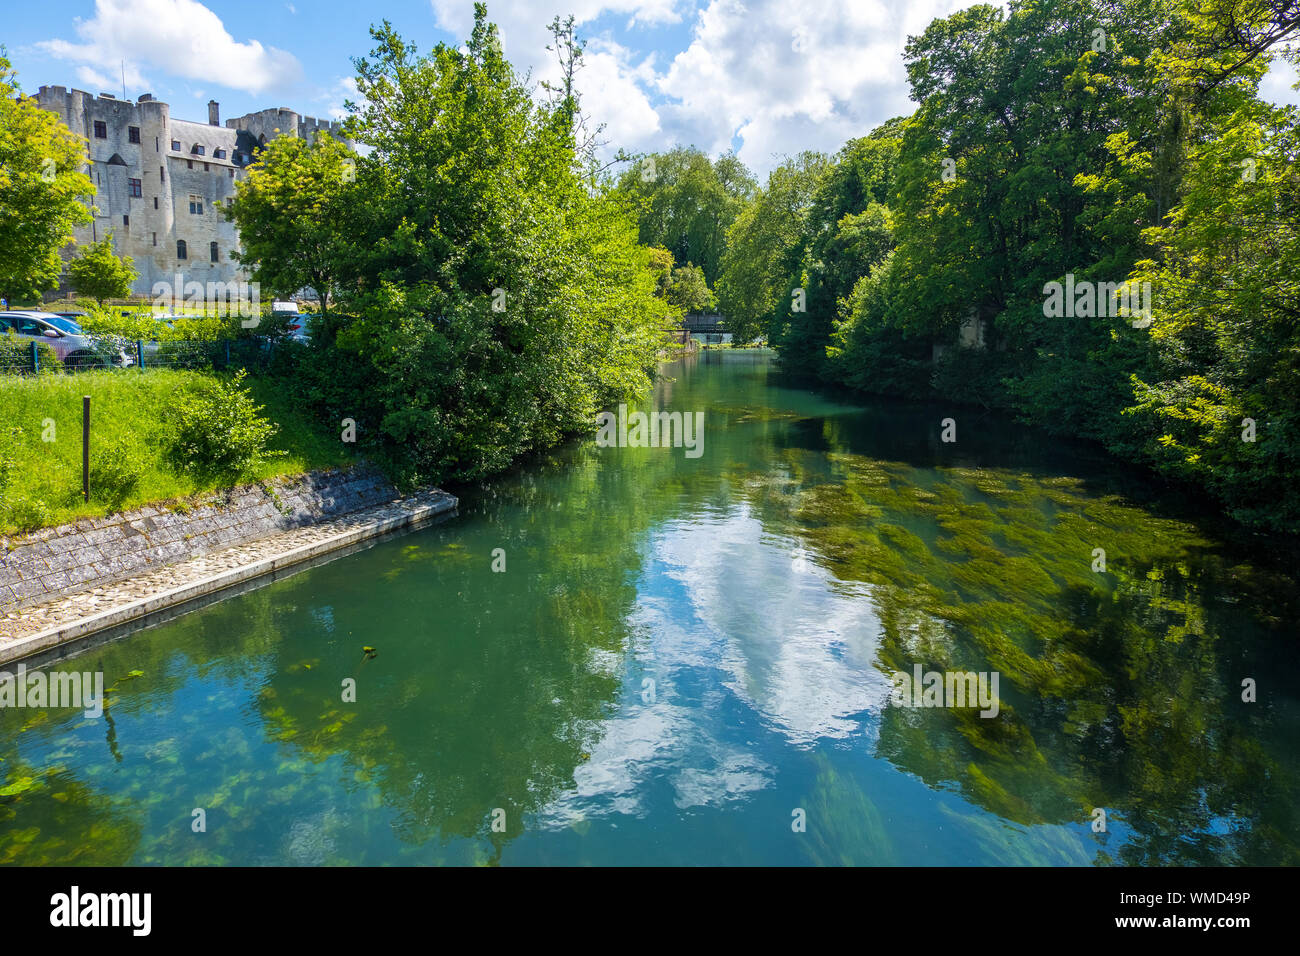 Niort, France - May 11, 2019: Beautiful landscape with reflection on a Sevres river in Niort, Deux-Sevres, France Stock Photo